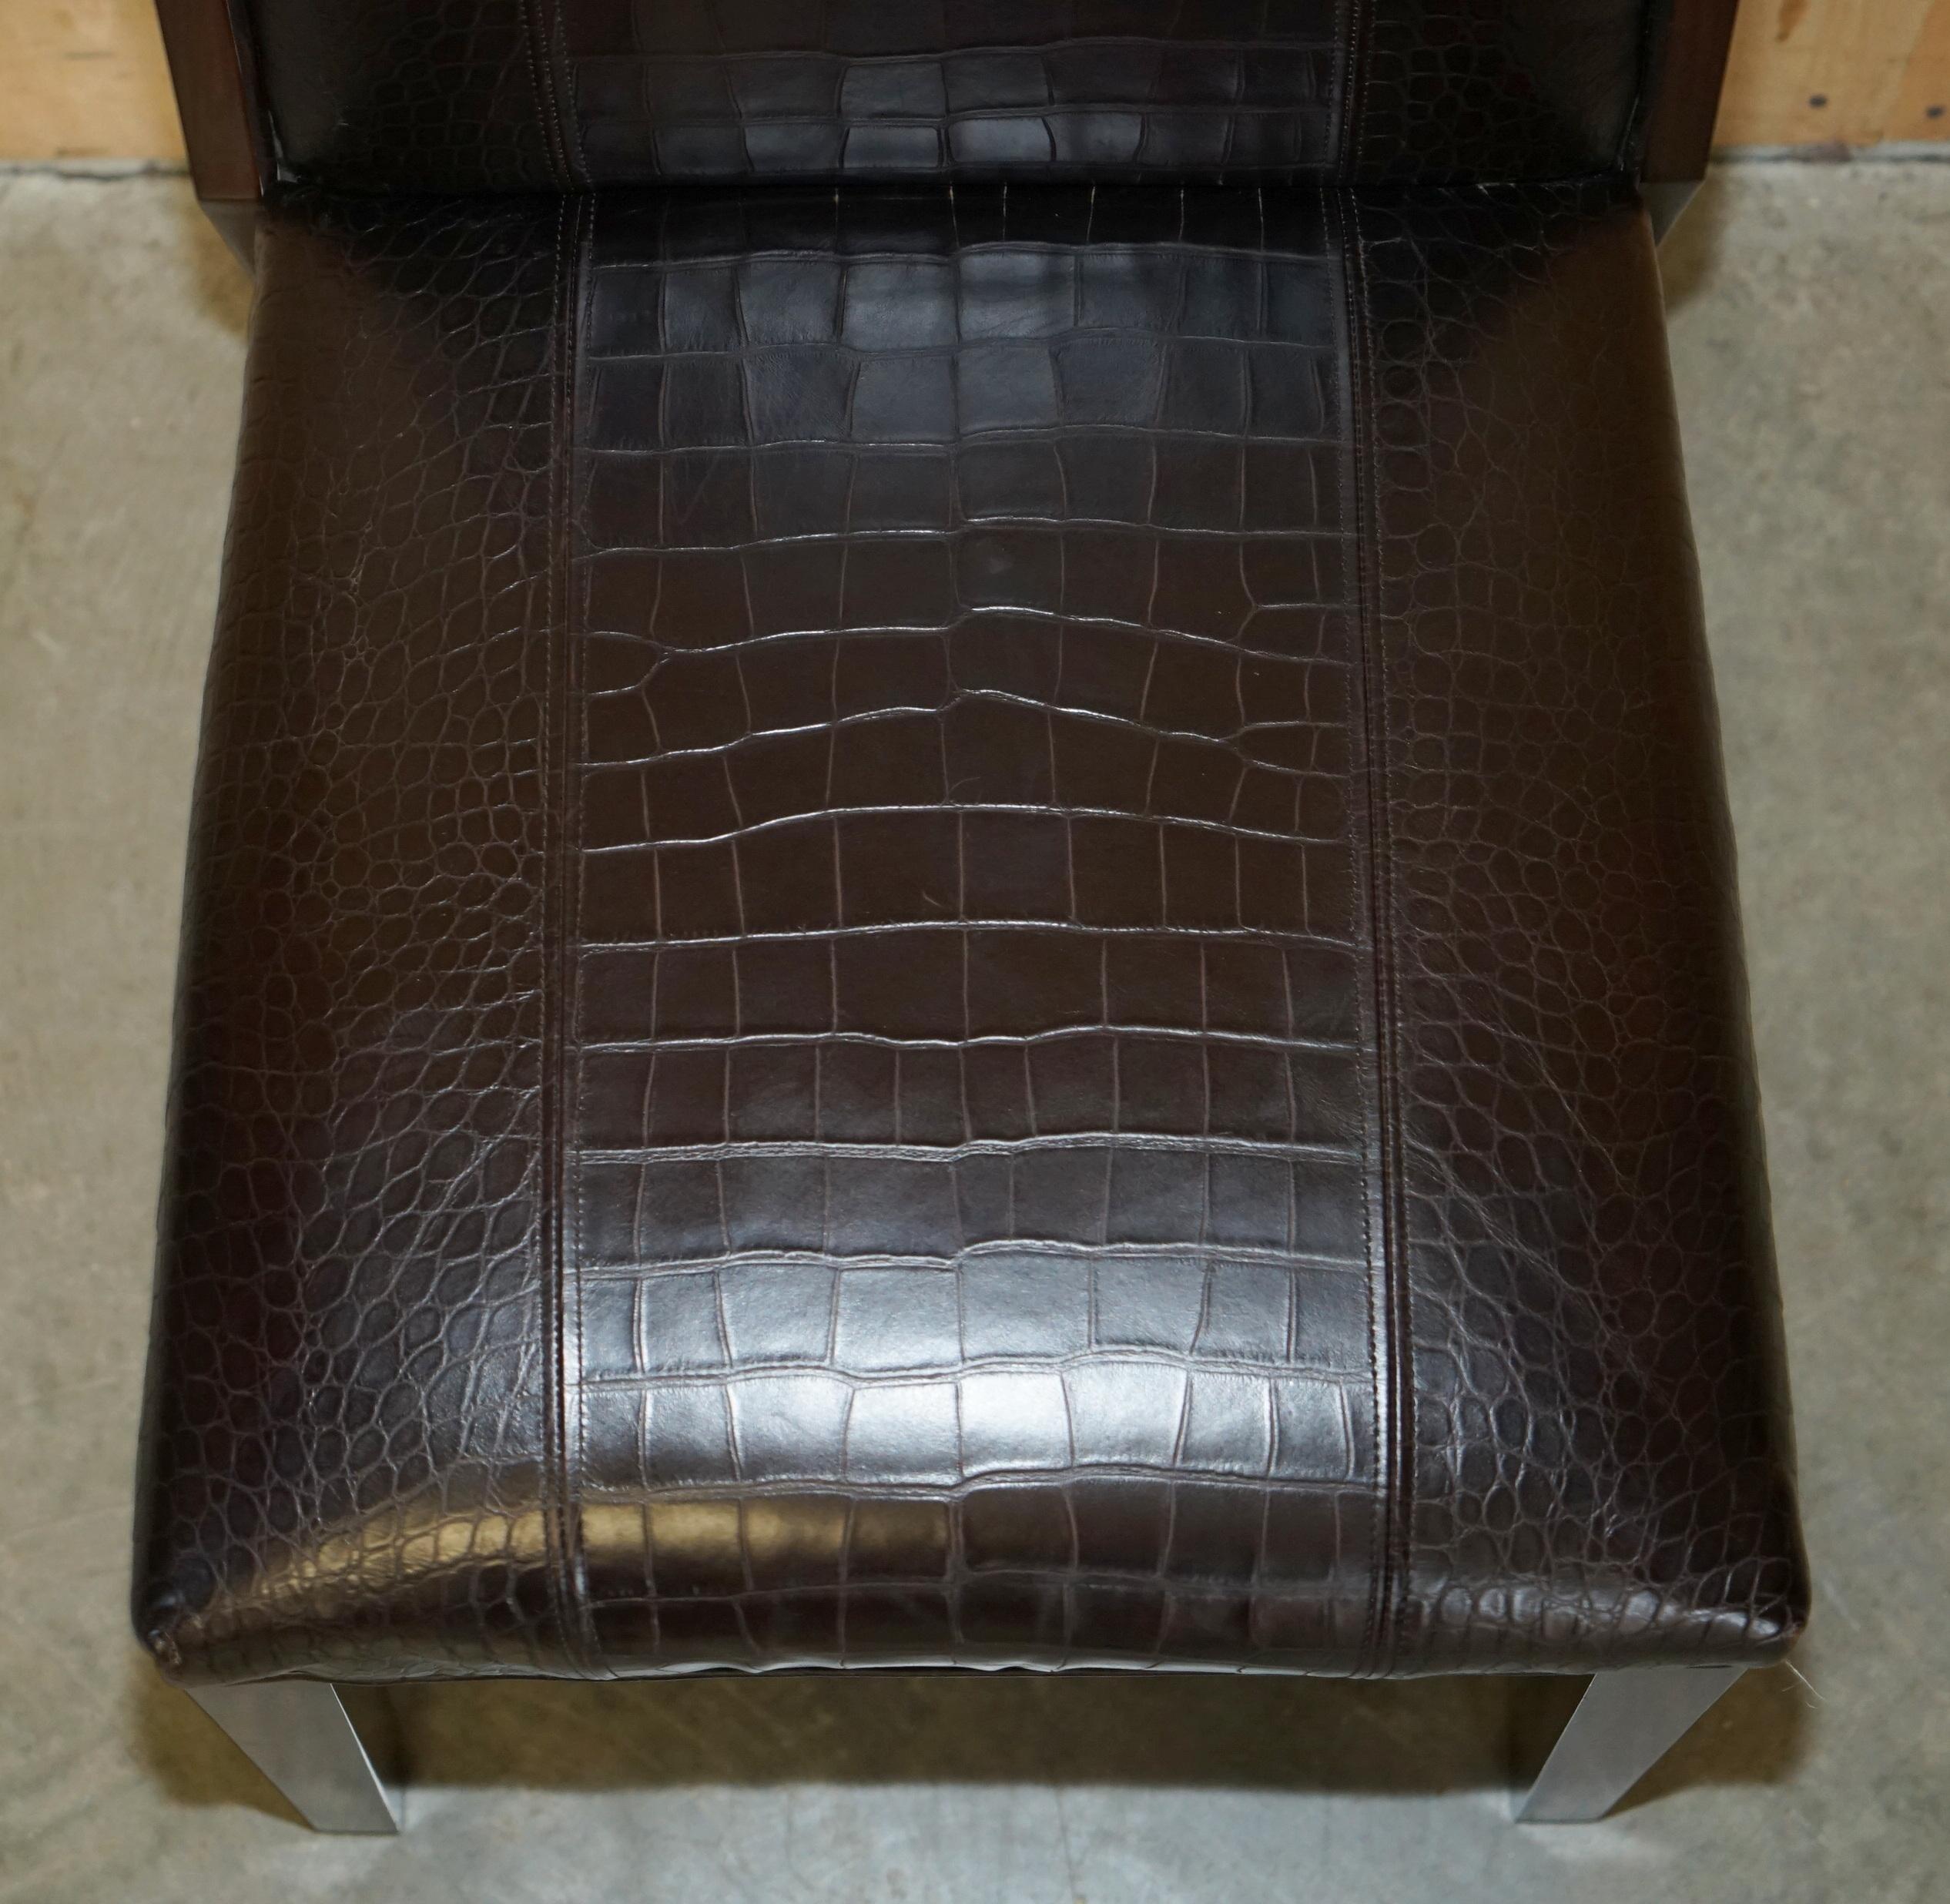 Leather RALPH LAUREN METROPOLIS SiDE OCCASIONAL CROCODILE PATINA LEATHER DINING CHAIRS For Sale